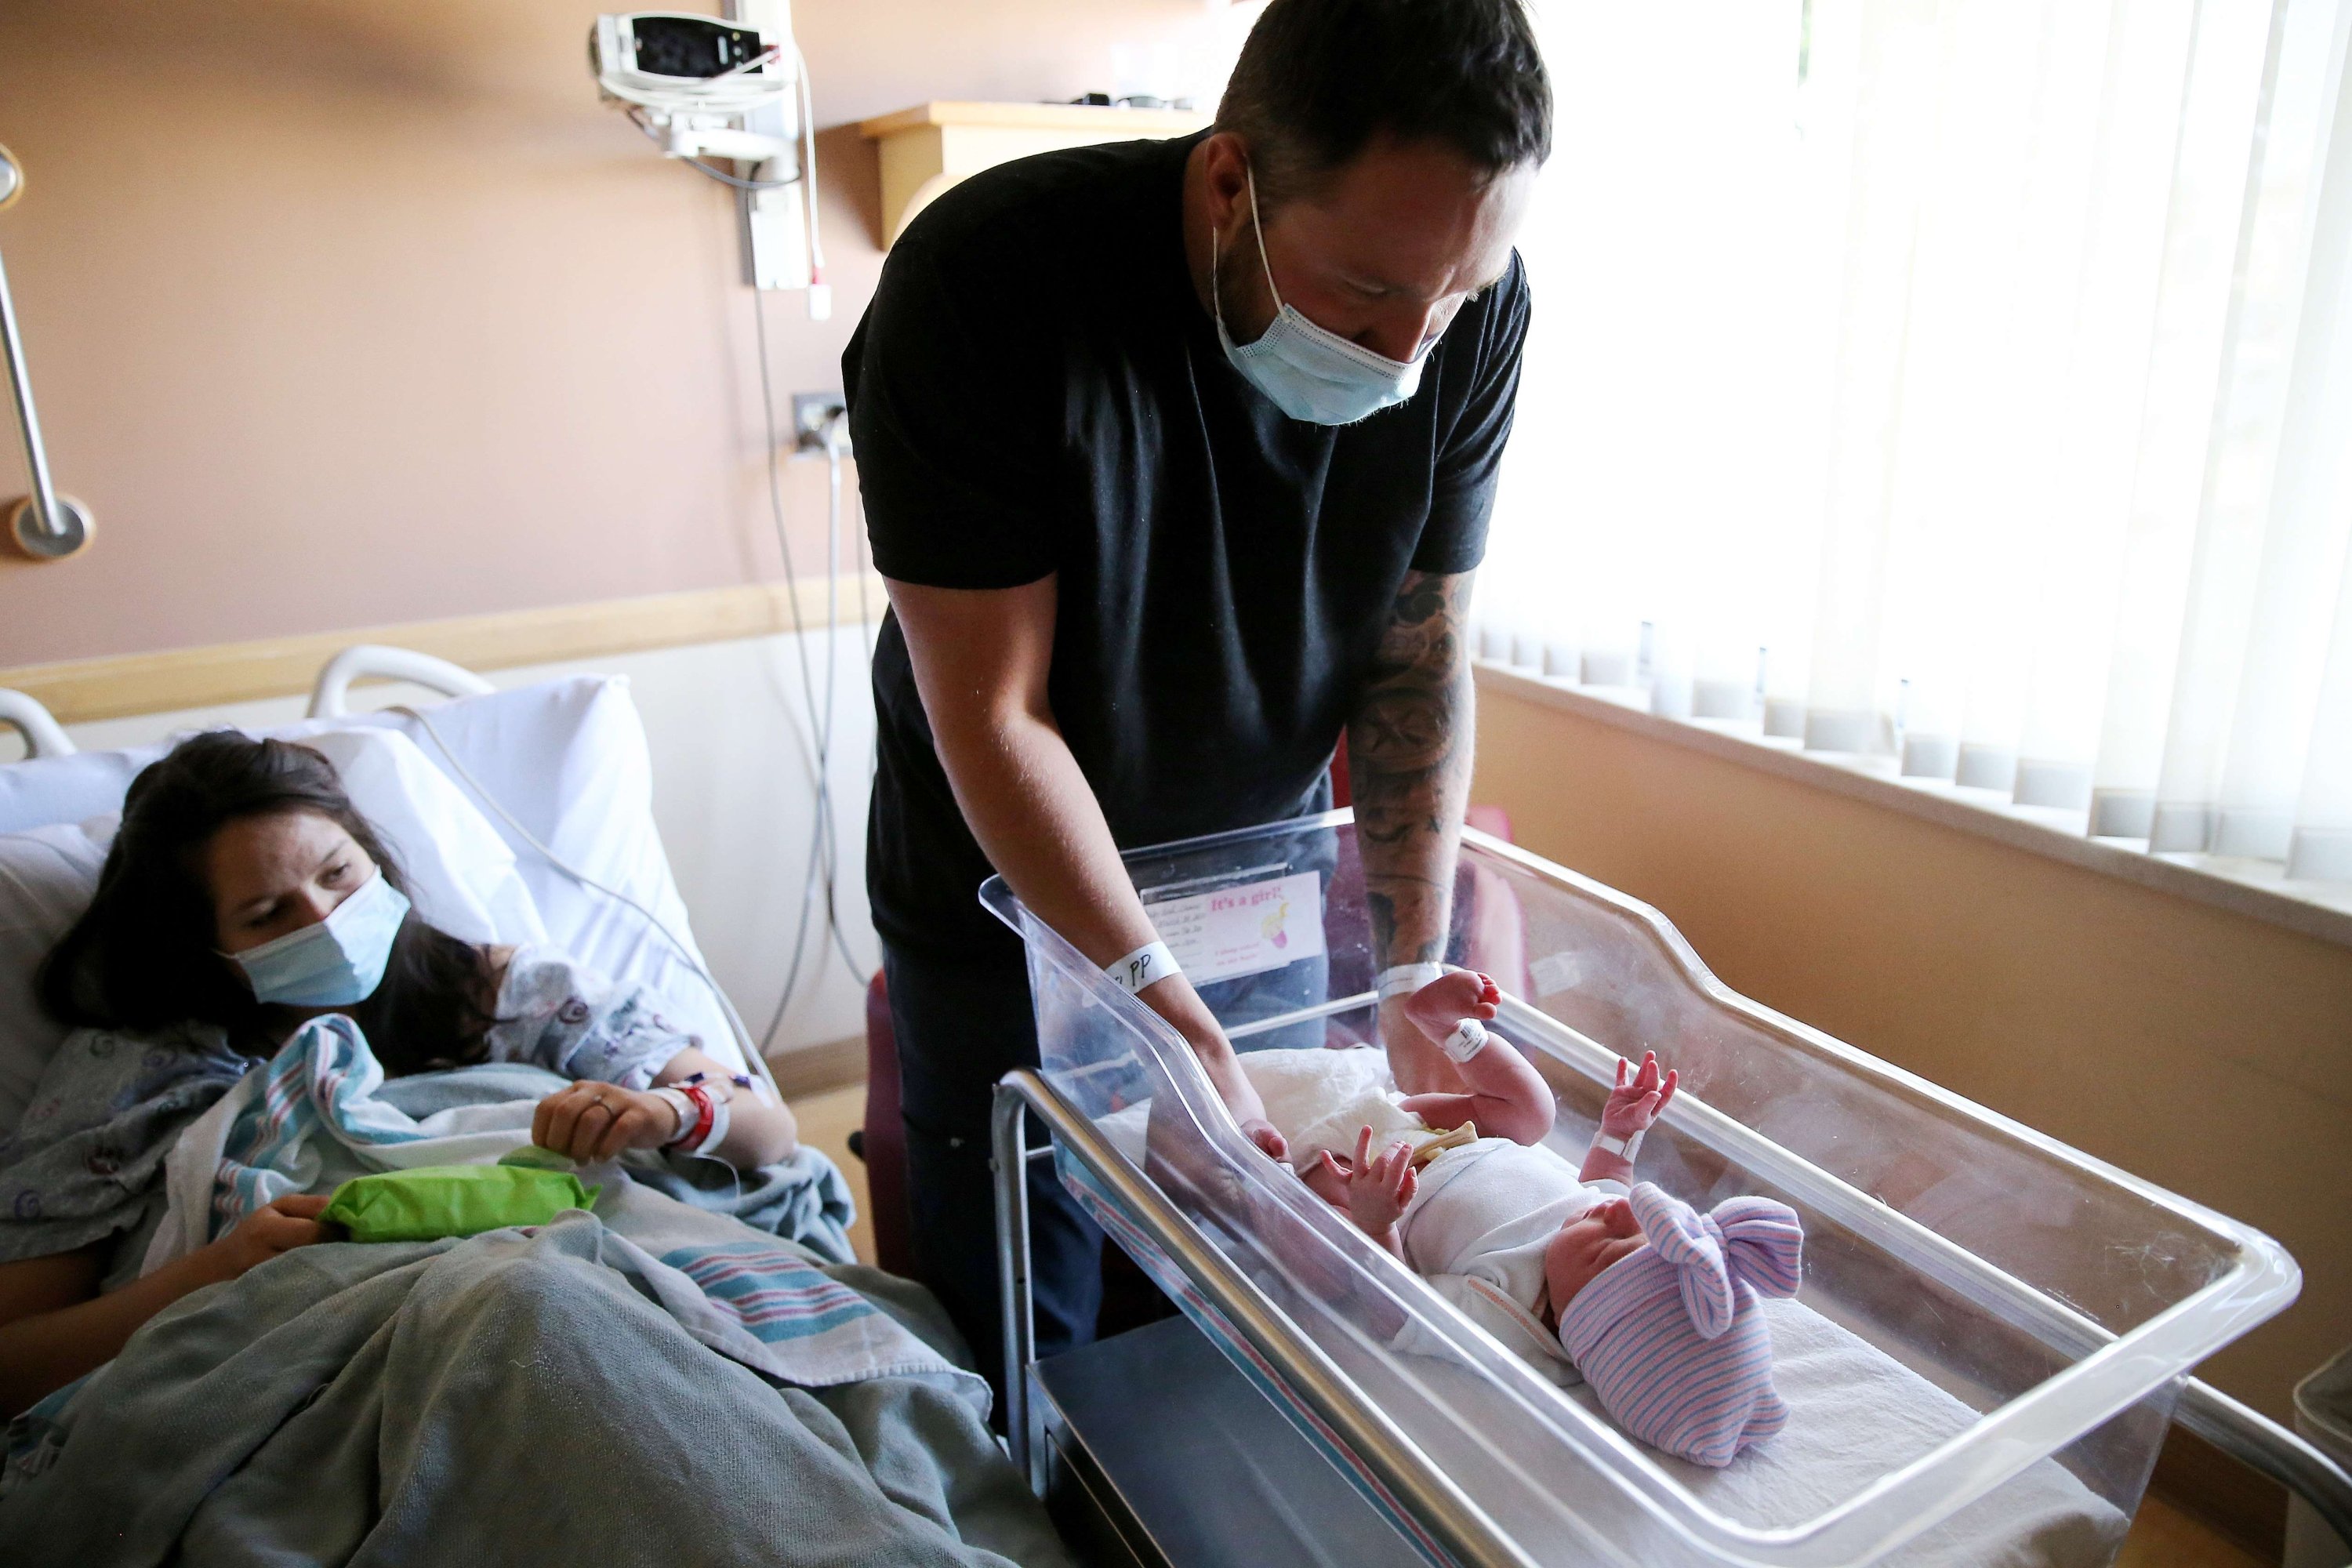 Matthew Carnes prepares to change diapers for his newborn daughter Evelina Carnes as his wife Breanna Llamas keeps watch in the postpartum unit at Providence St. Mary Medical Center in Apple Valley, California, the U.S., March 30, 2021. (Getty Images/AFP)